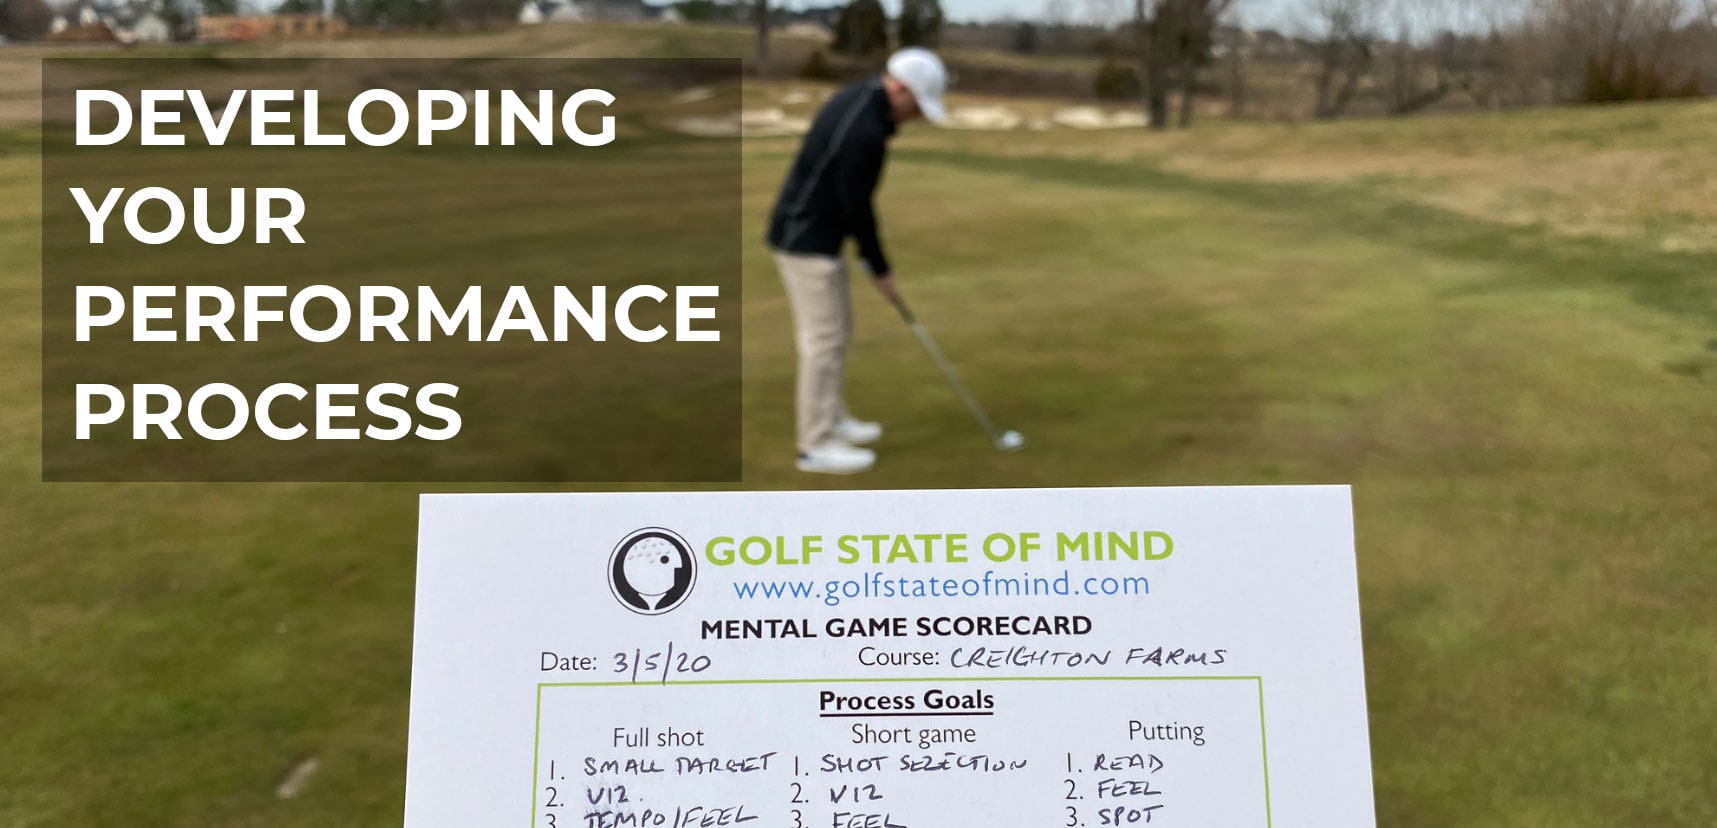 What’s Your Performance Plan For Your Next Round?